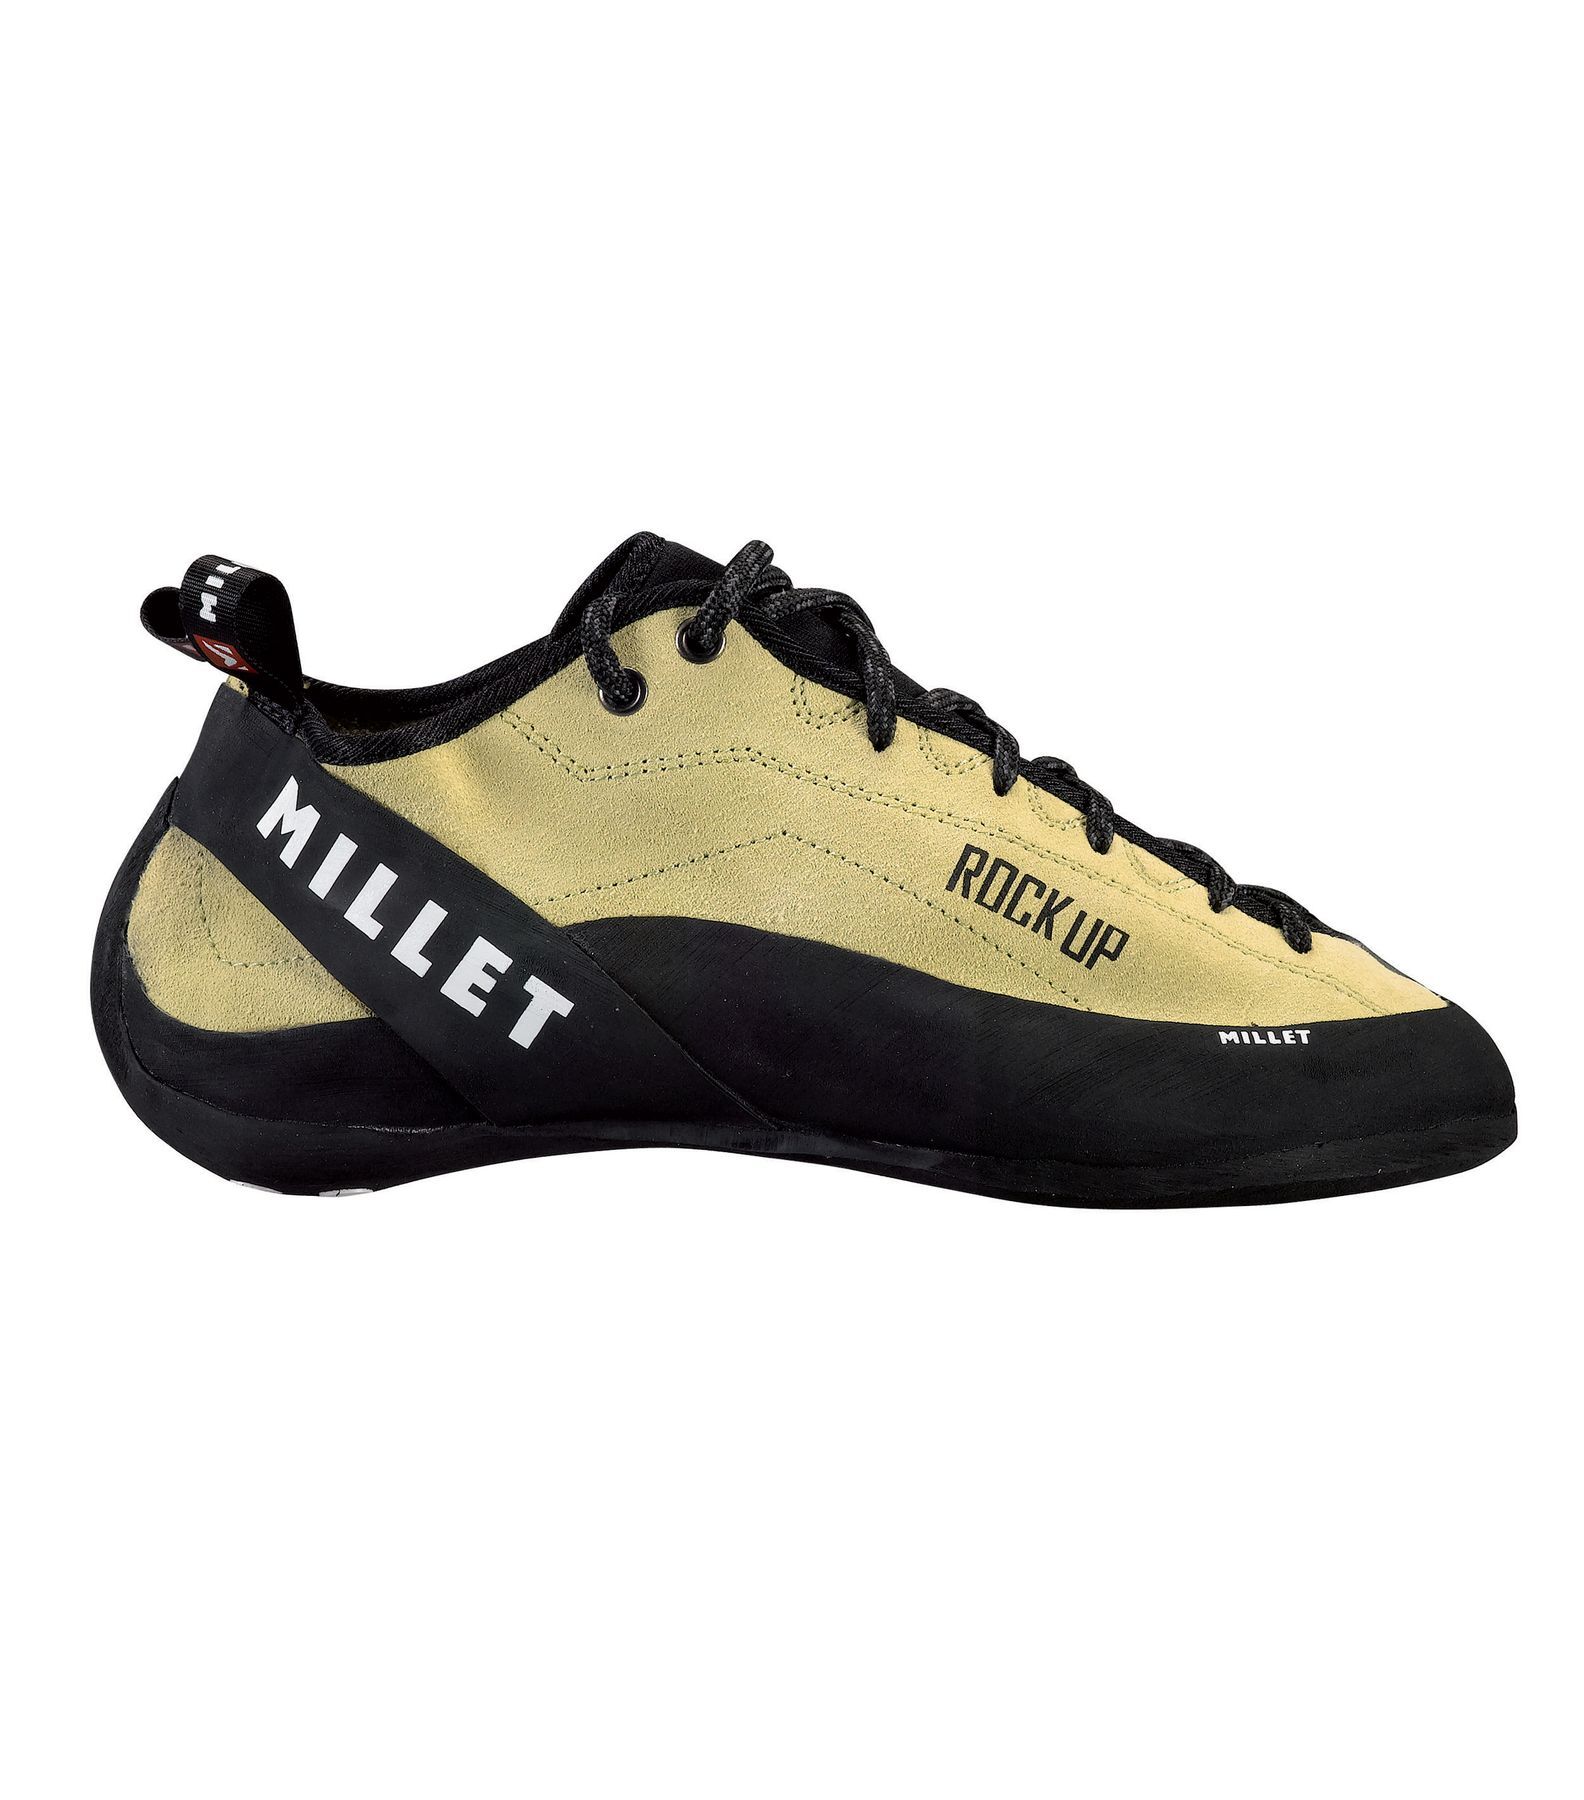 Millet - Rock Up - Climbing shoes